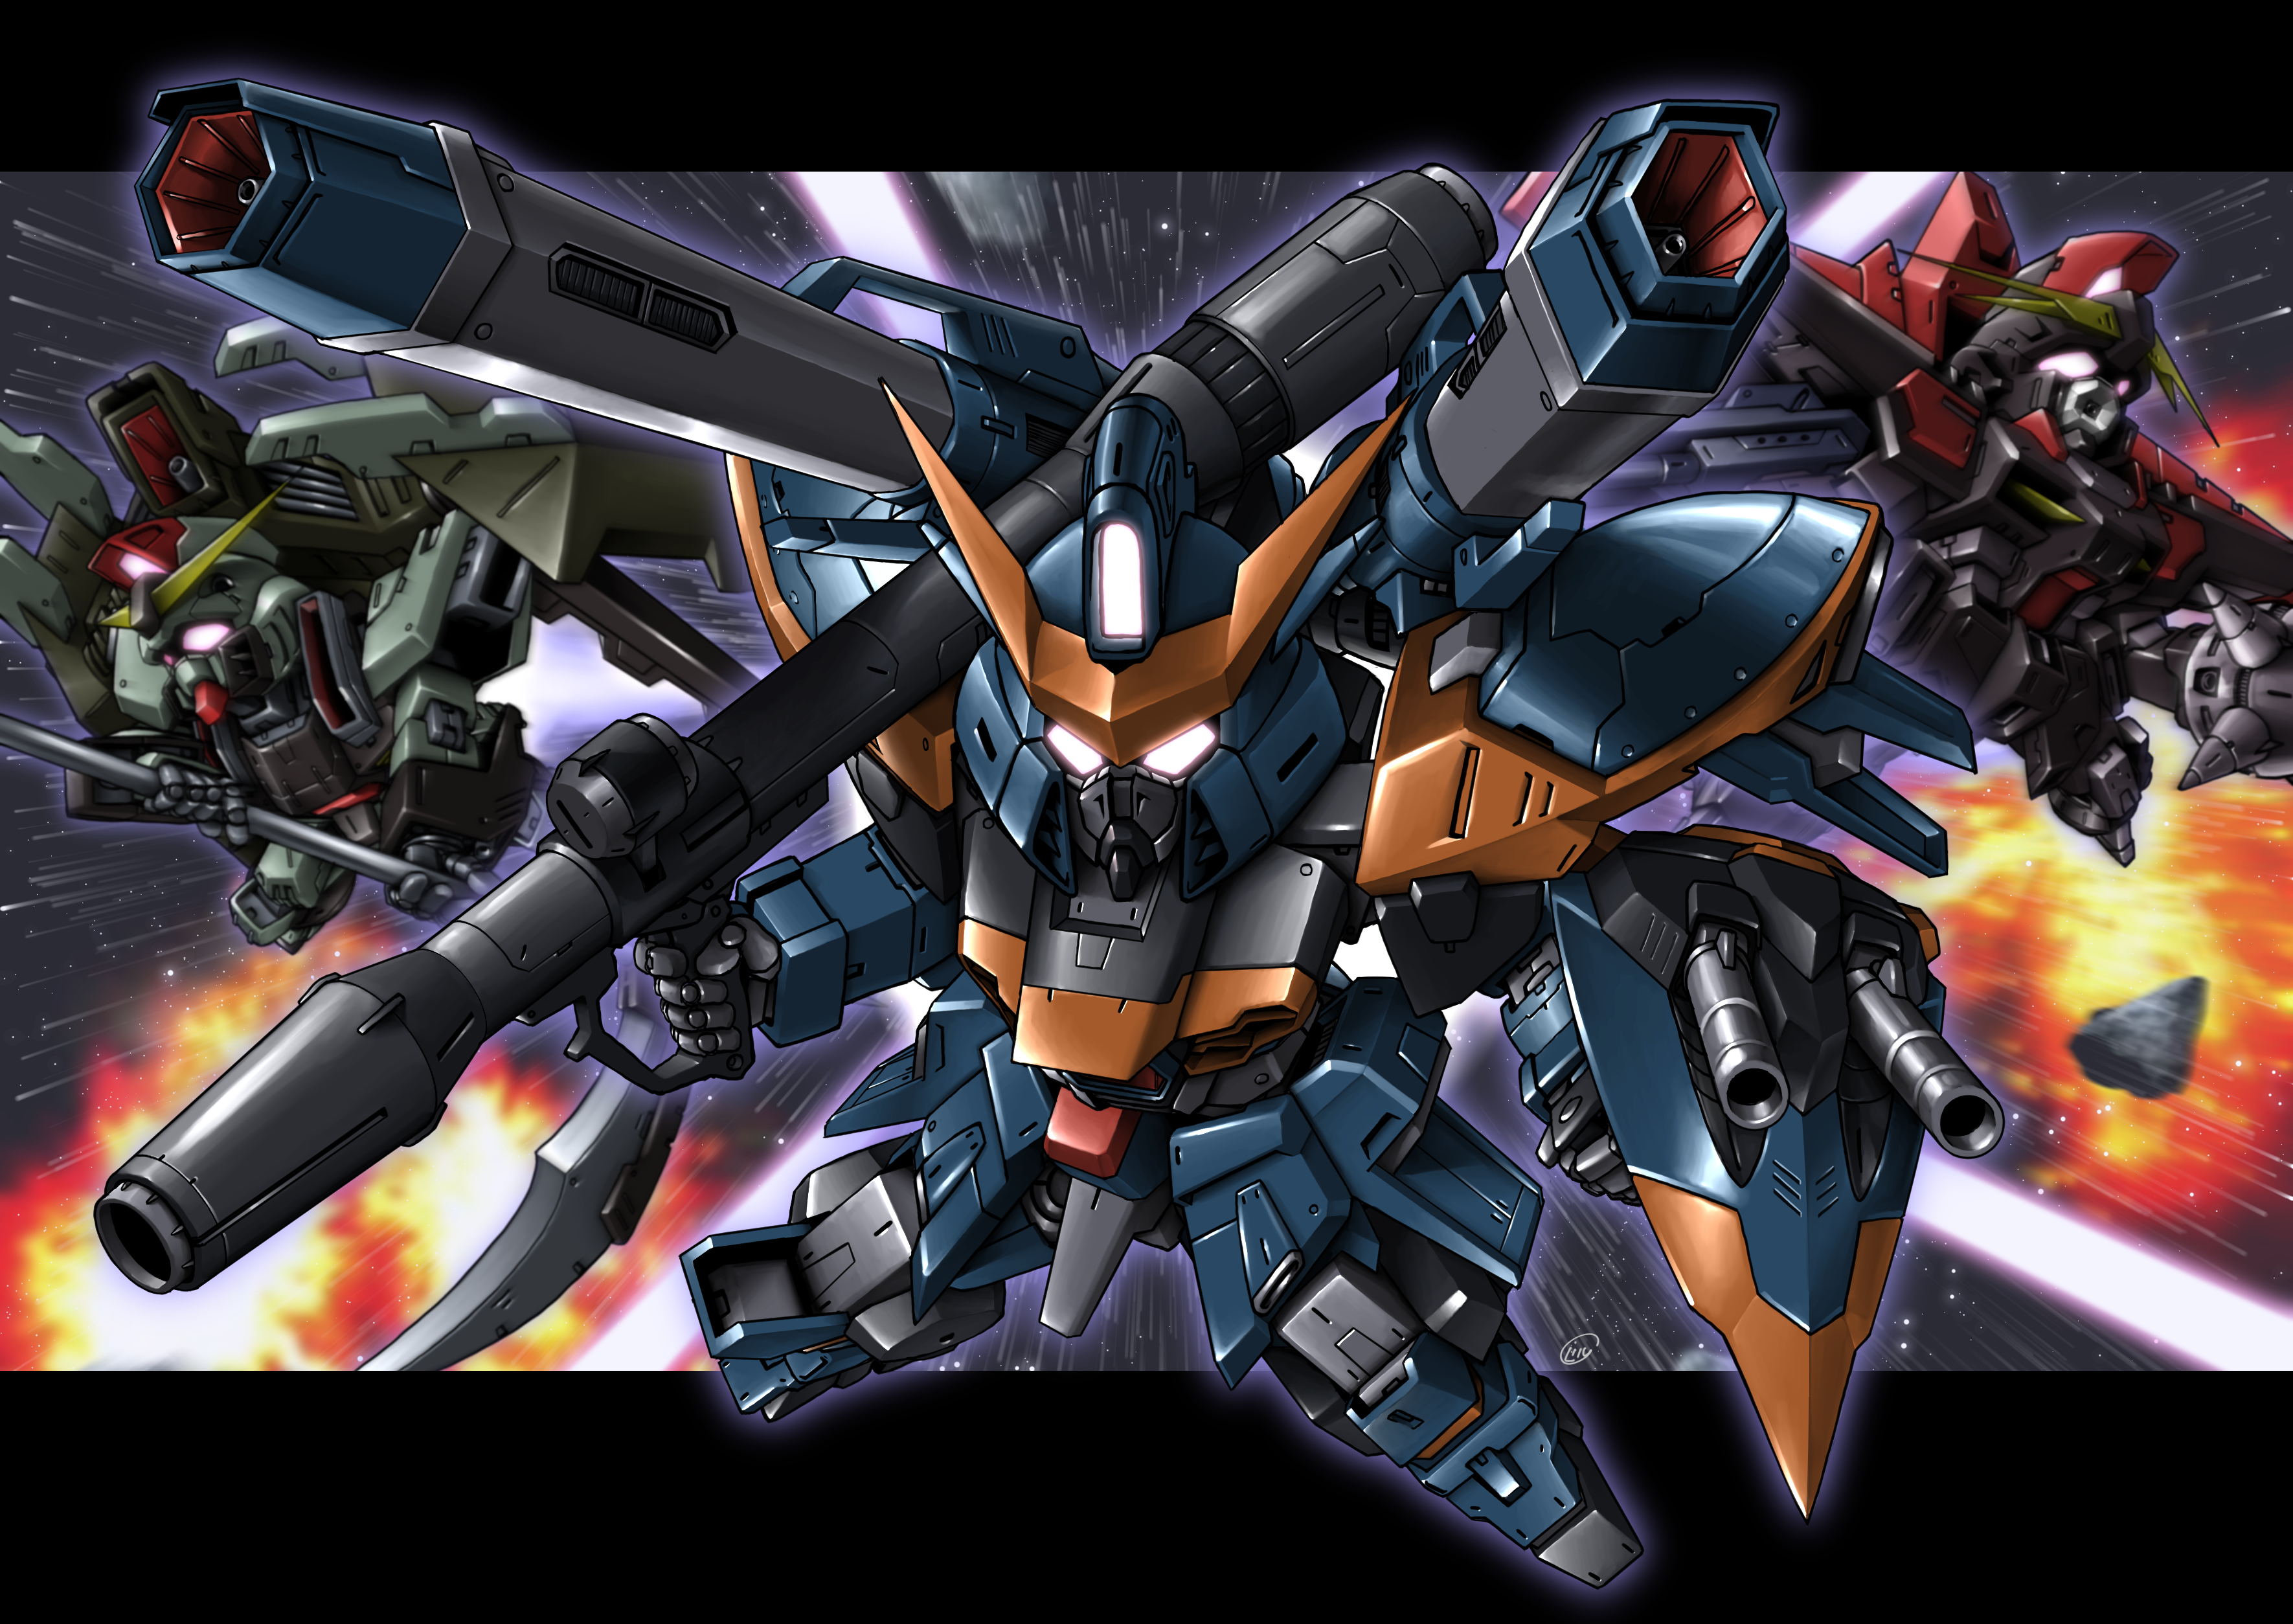 Anime Mobile Suit Gundam SEED HD Wallpaper | Background Image